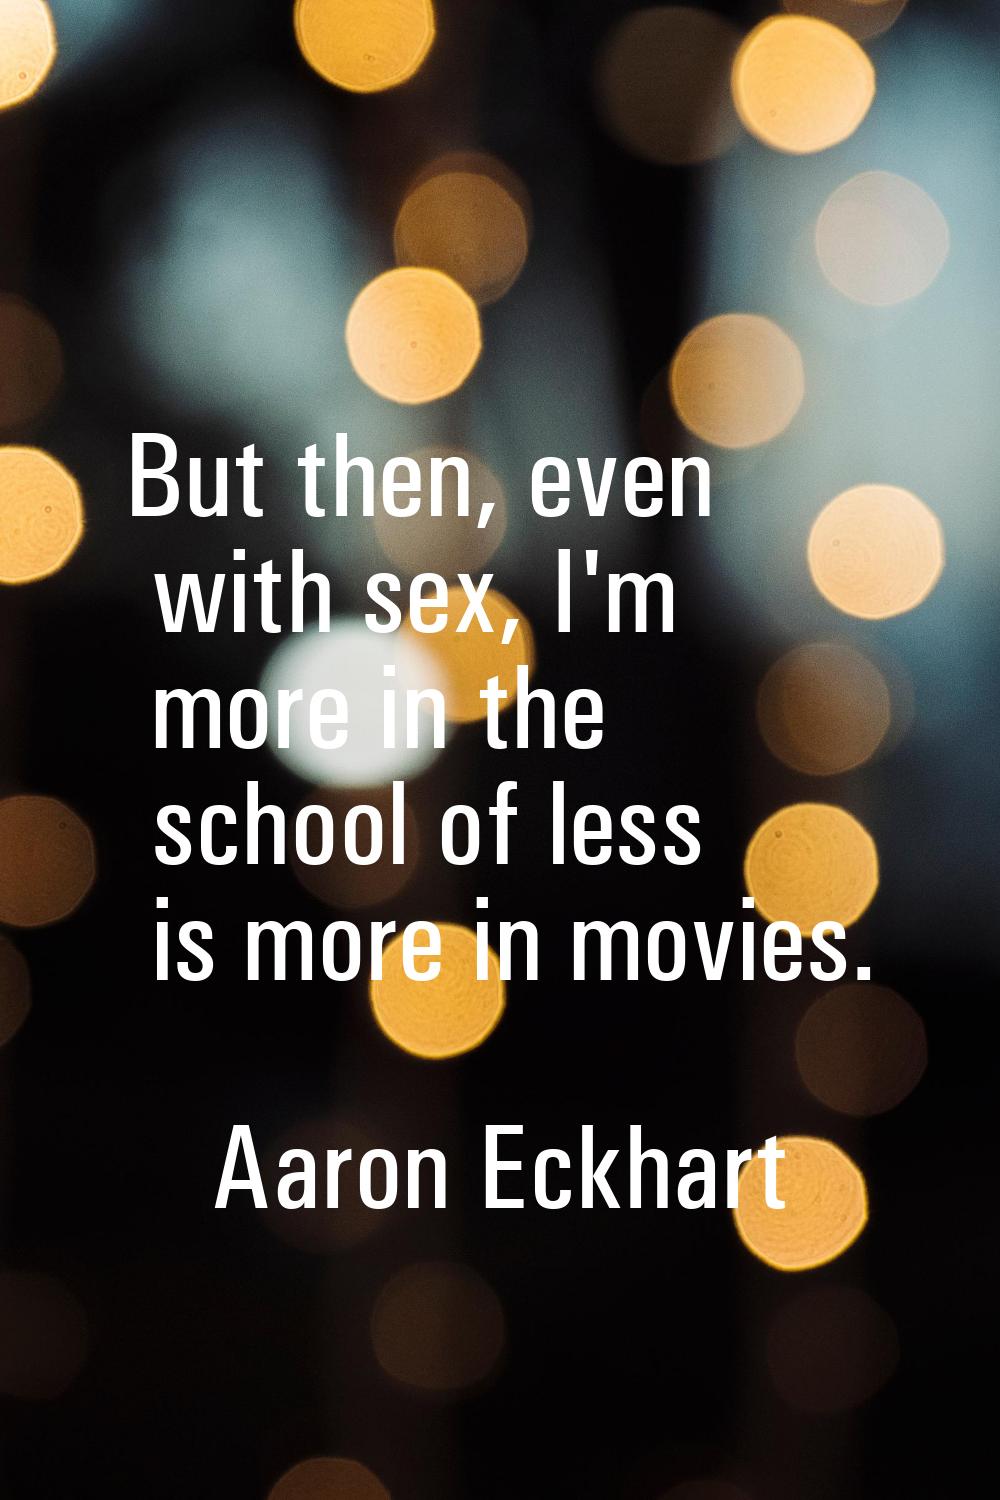 But then, even with sex, I'm more in the school of less is more in movies.